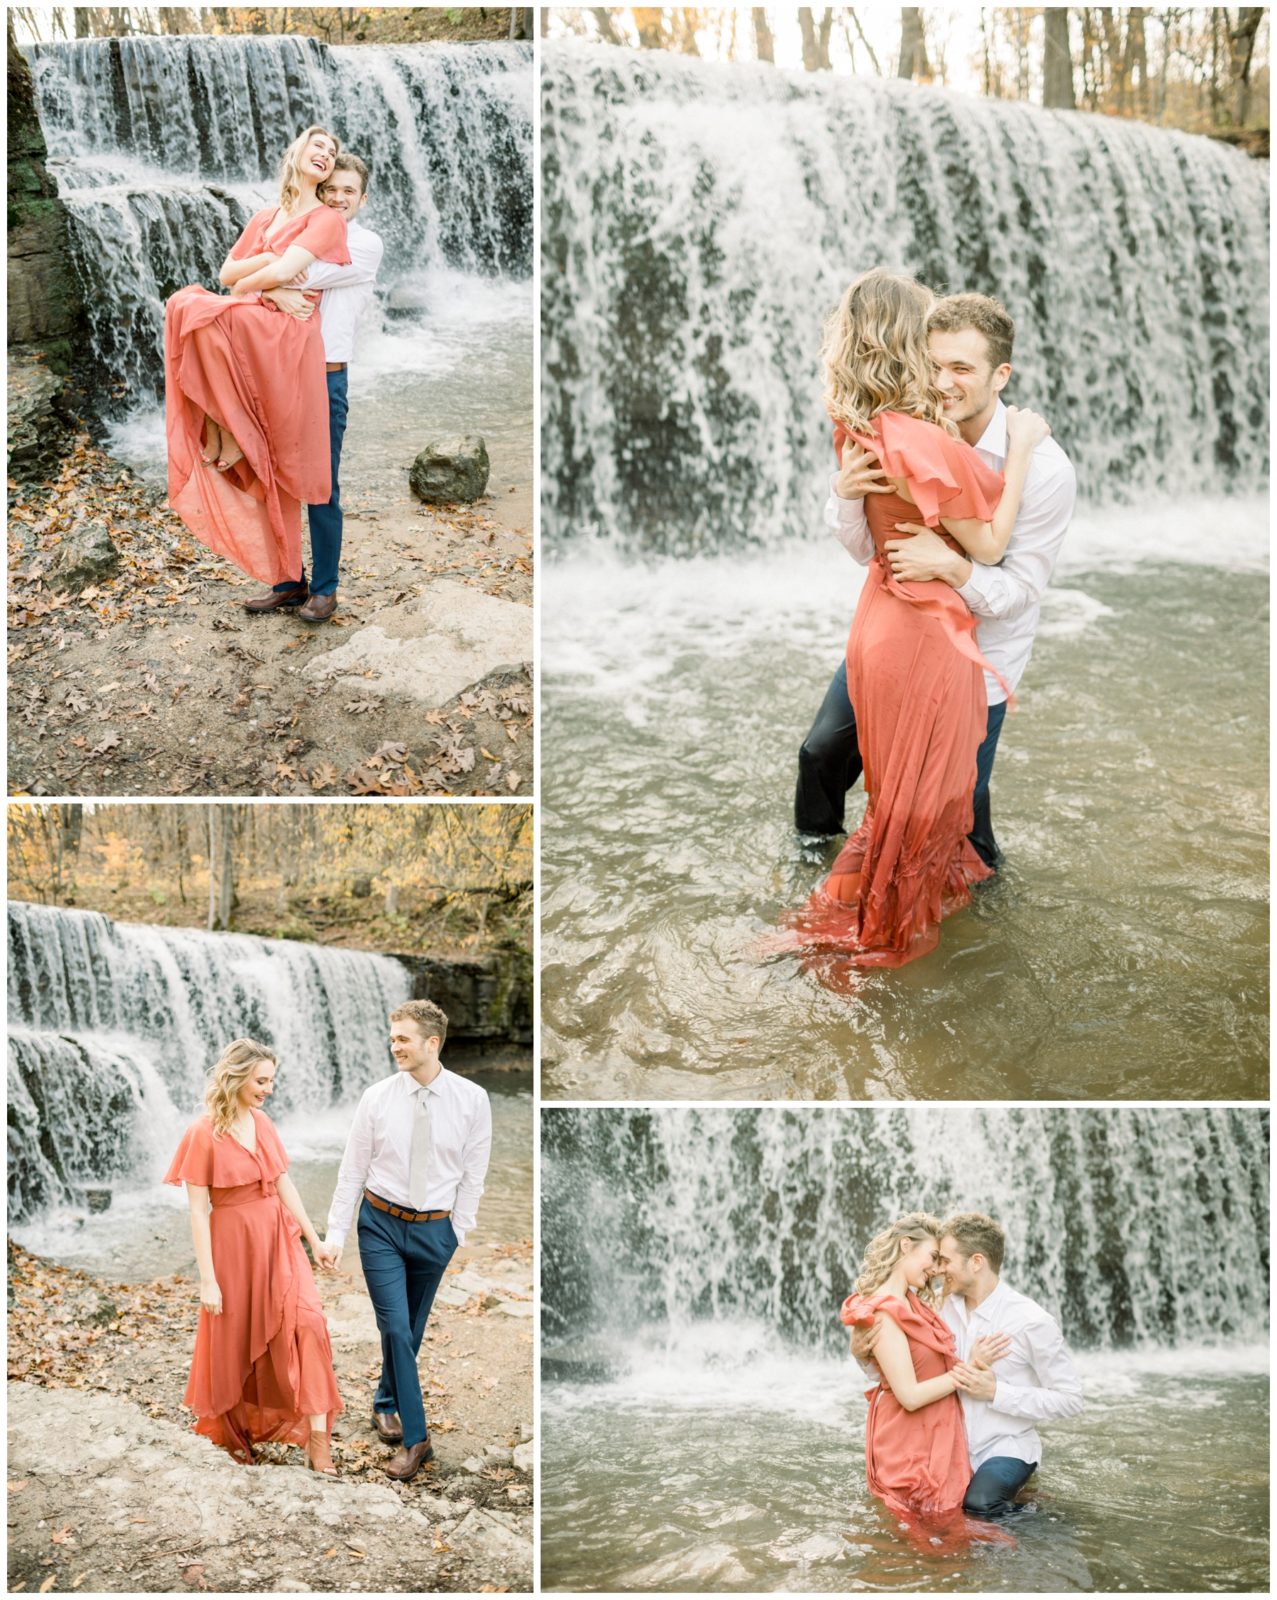 Composition of four photos. First photo shows a couple. He's holding her up and her feet are not touching the ground. There are leafs on the ground. On the second photo they are inside  the water, hugging, and there's a waterfall behind. On the third photo they are holding hands, side by side, leafs on the ground and a waterfall behind. The fourth photo they are inside the water, waterfall behind them. They are holding each other and she's placing her hand on his chest.